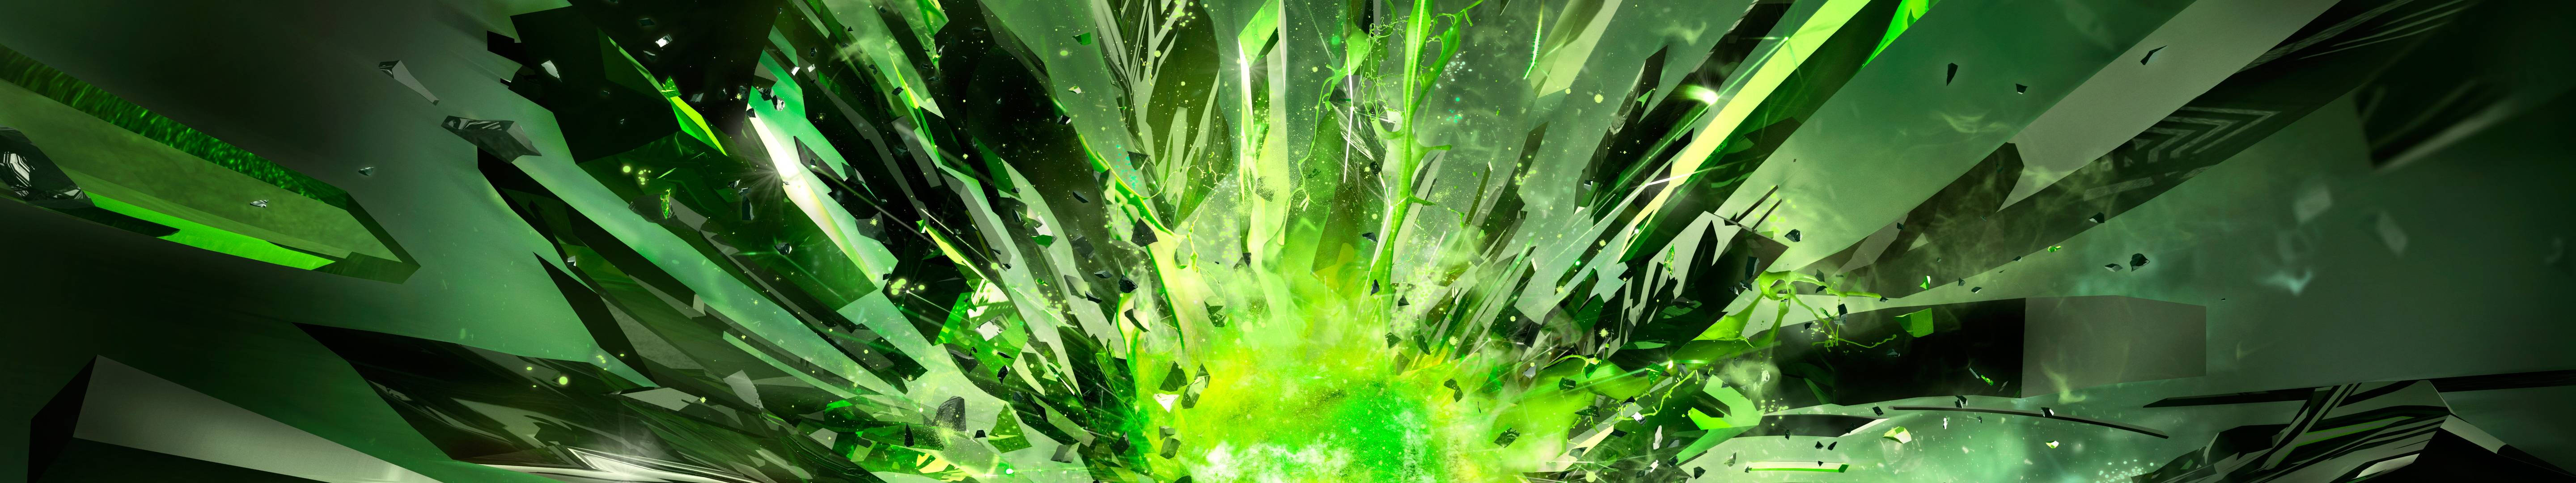 Green Crystals Explosion Background